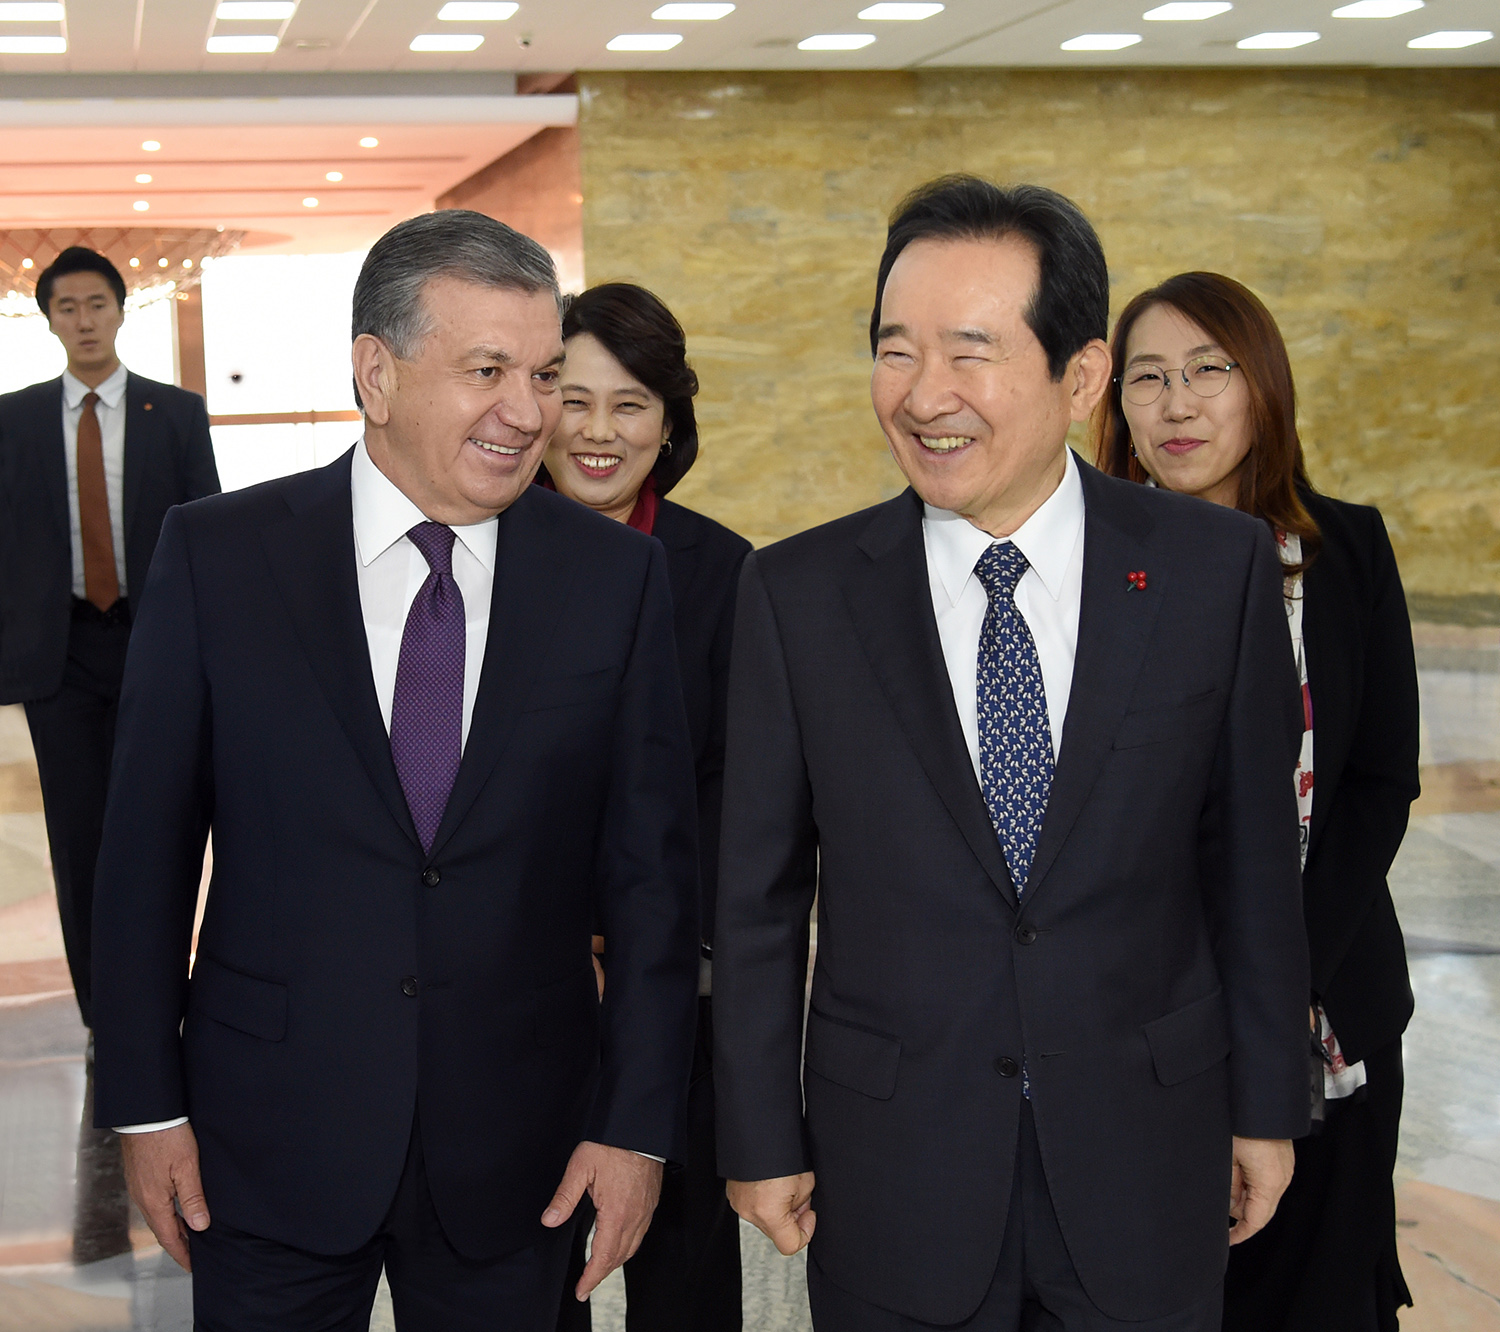 President of Uzbekistan visited the National Assembly of the Republic of Korea